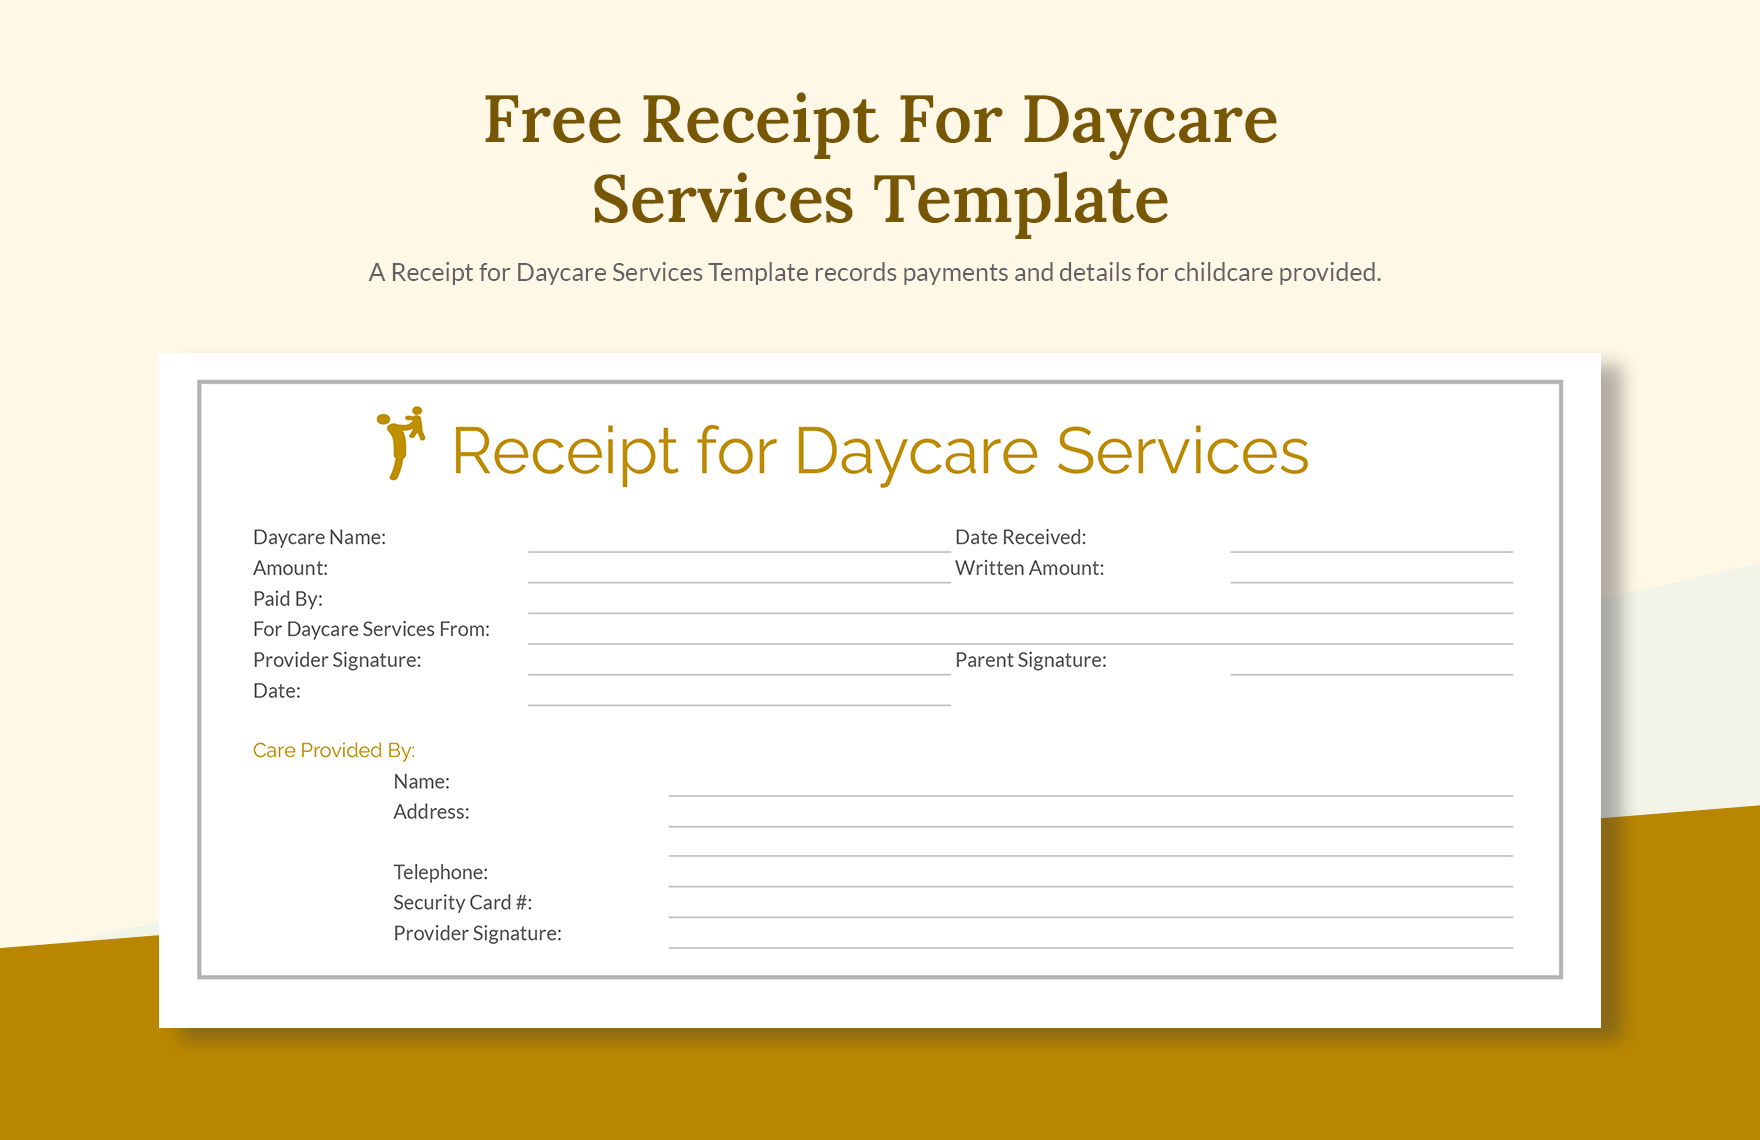 Free Receipt For Daycare Services Template Download In Word Google Docs Excel PDF Google